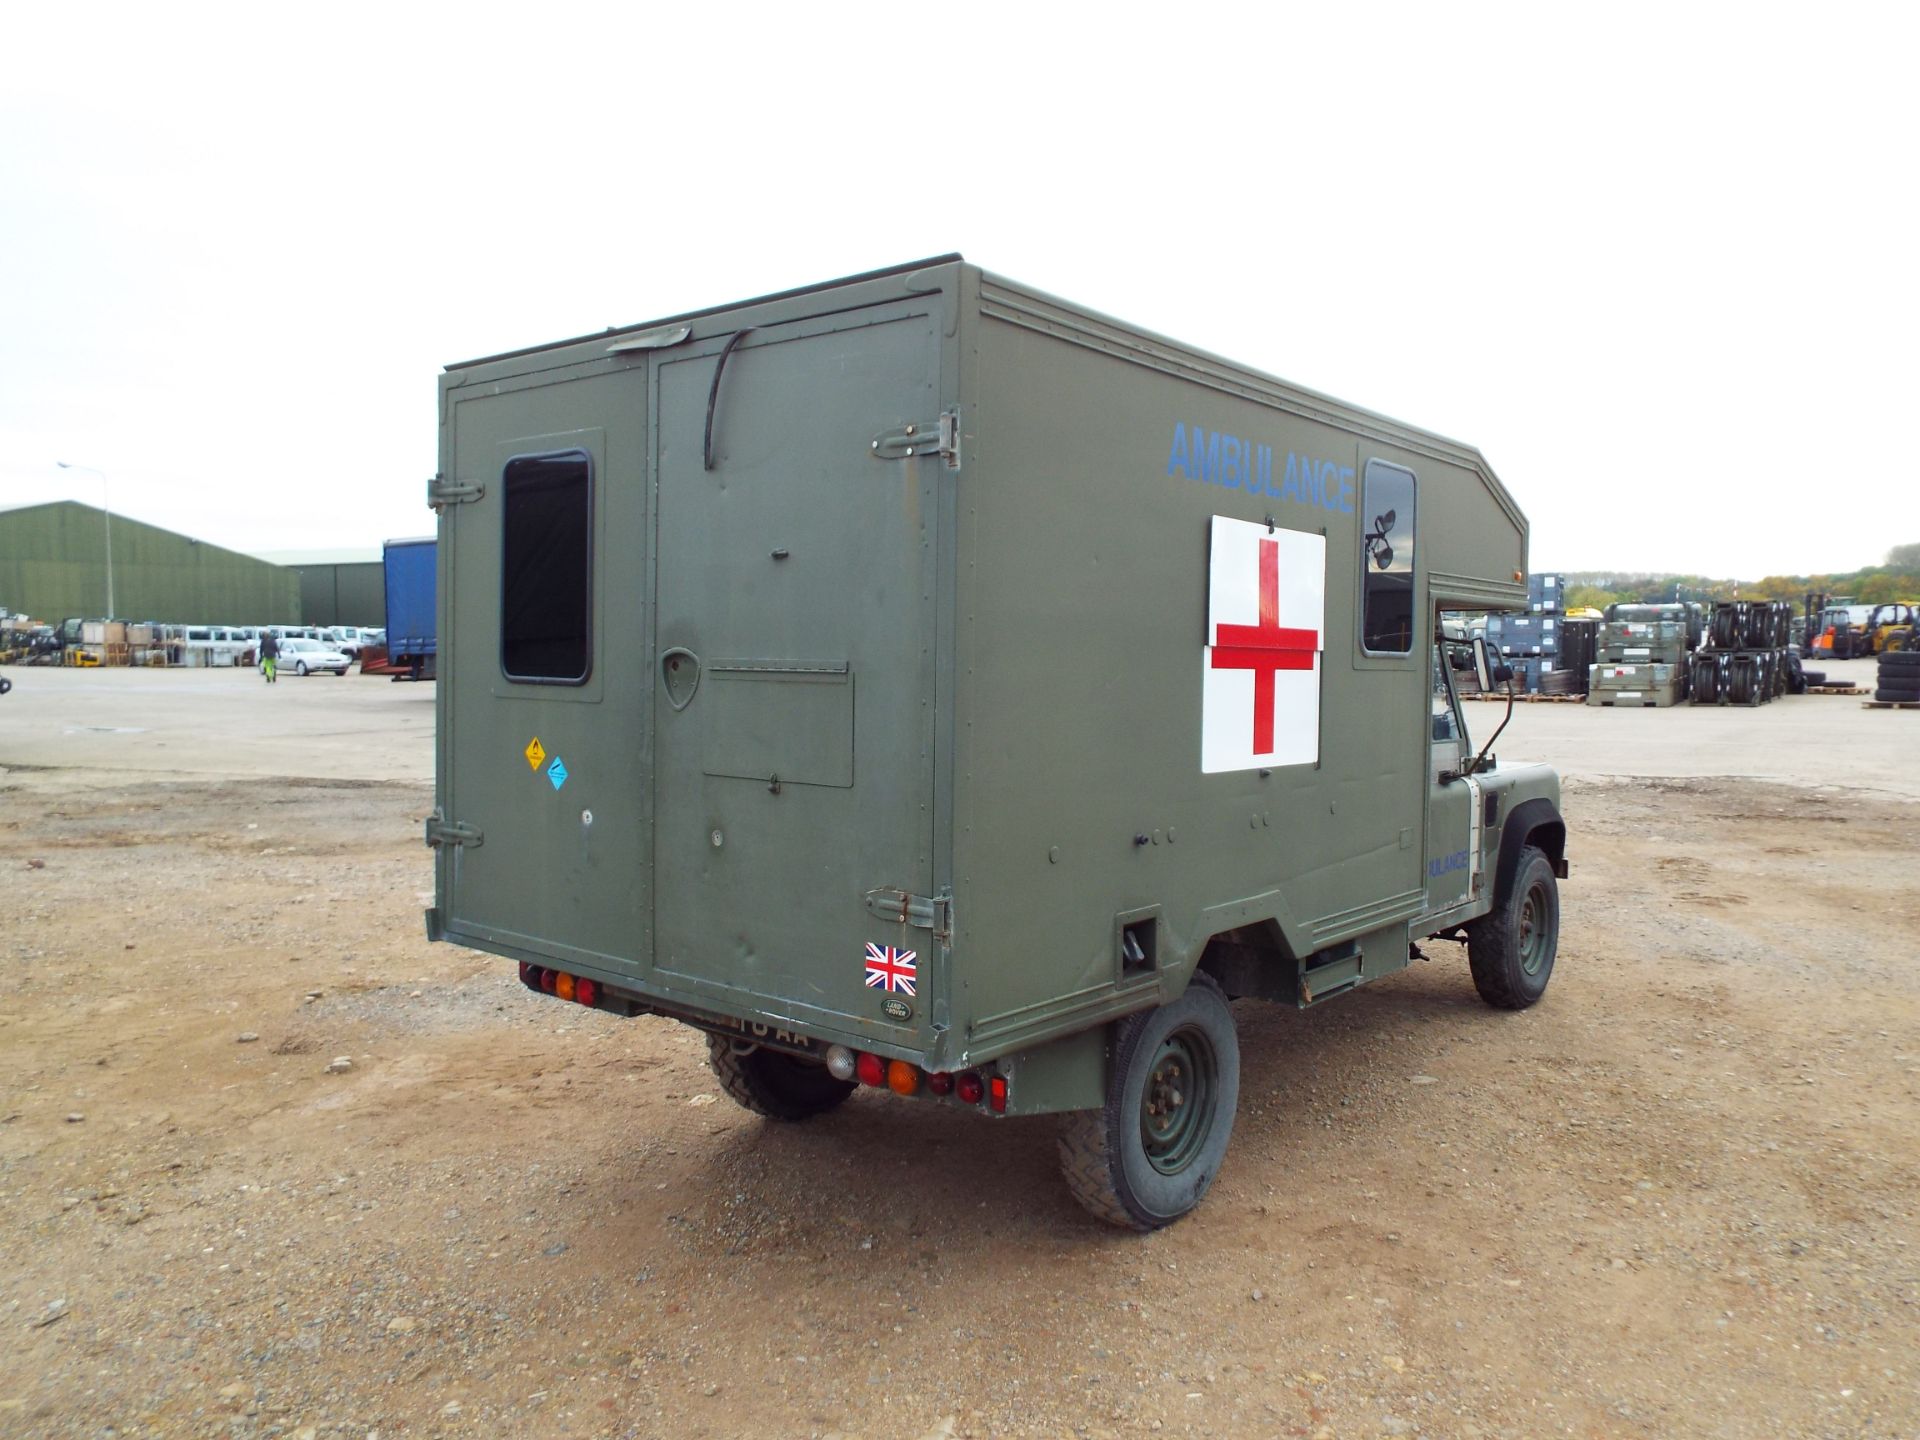 Military Specification Land Rover Wolf 130 ambulance - Image 7 of 28